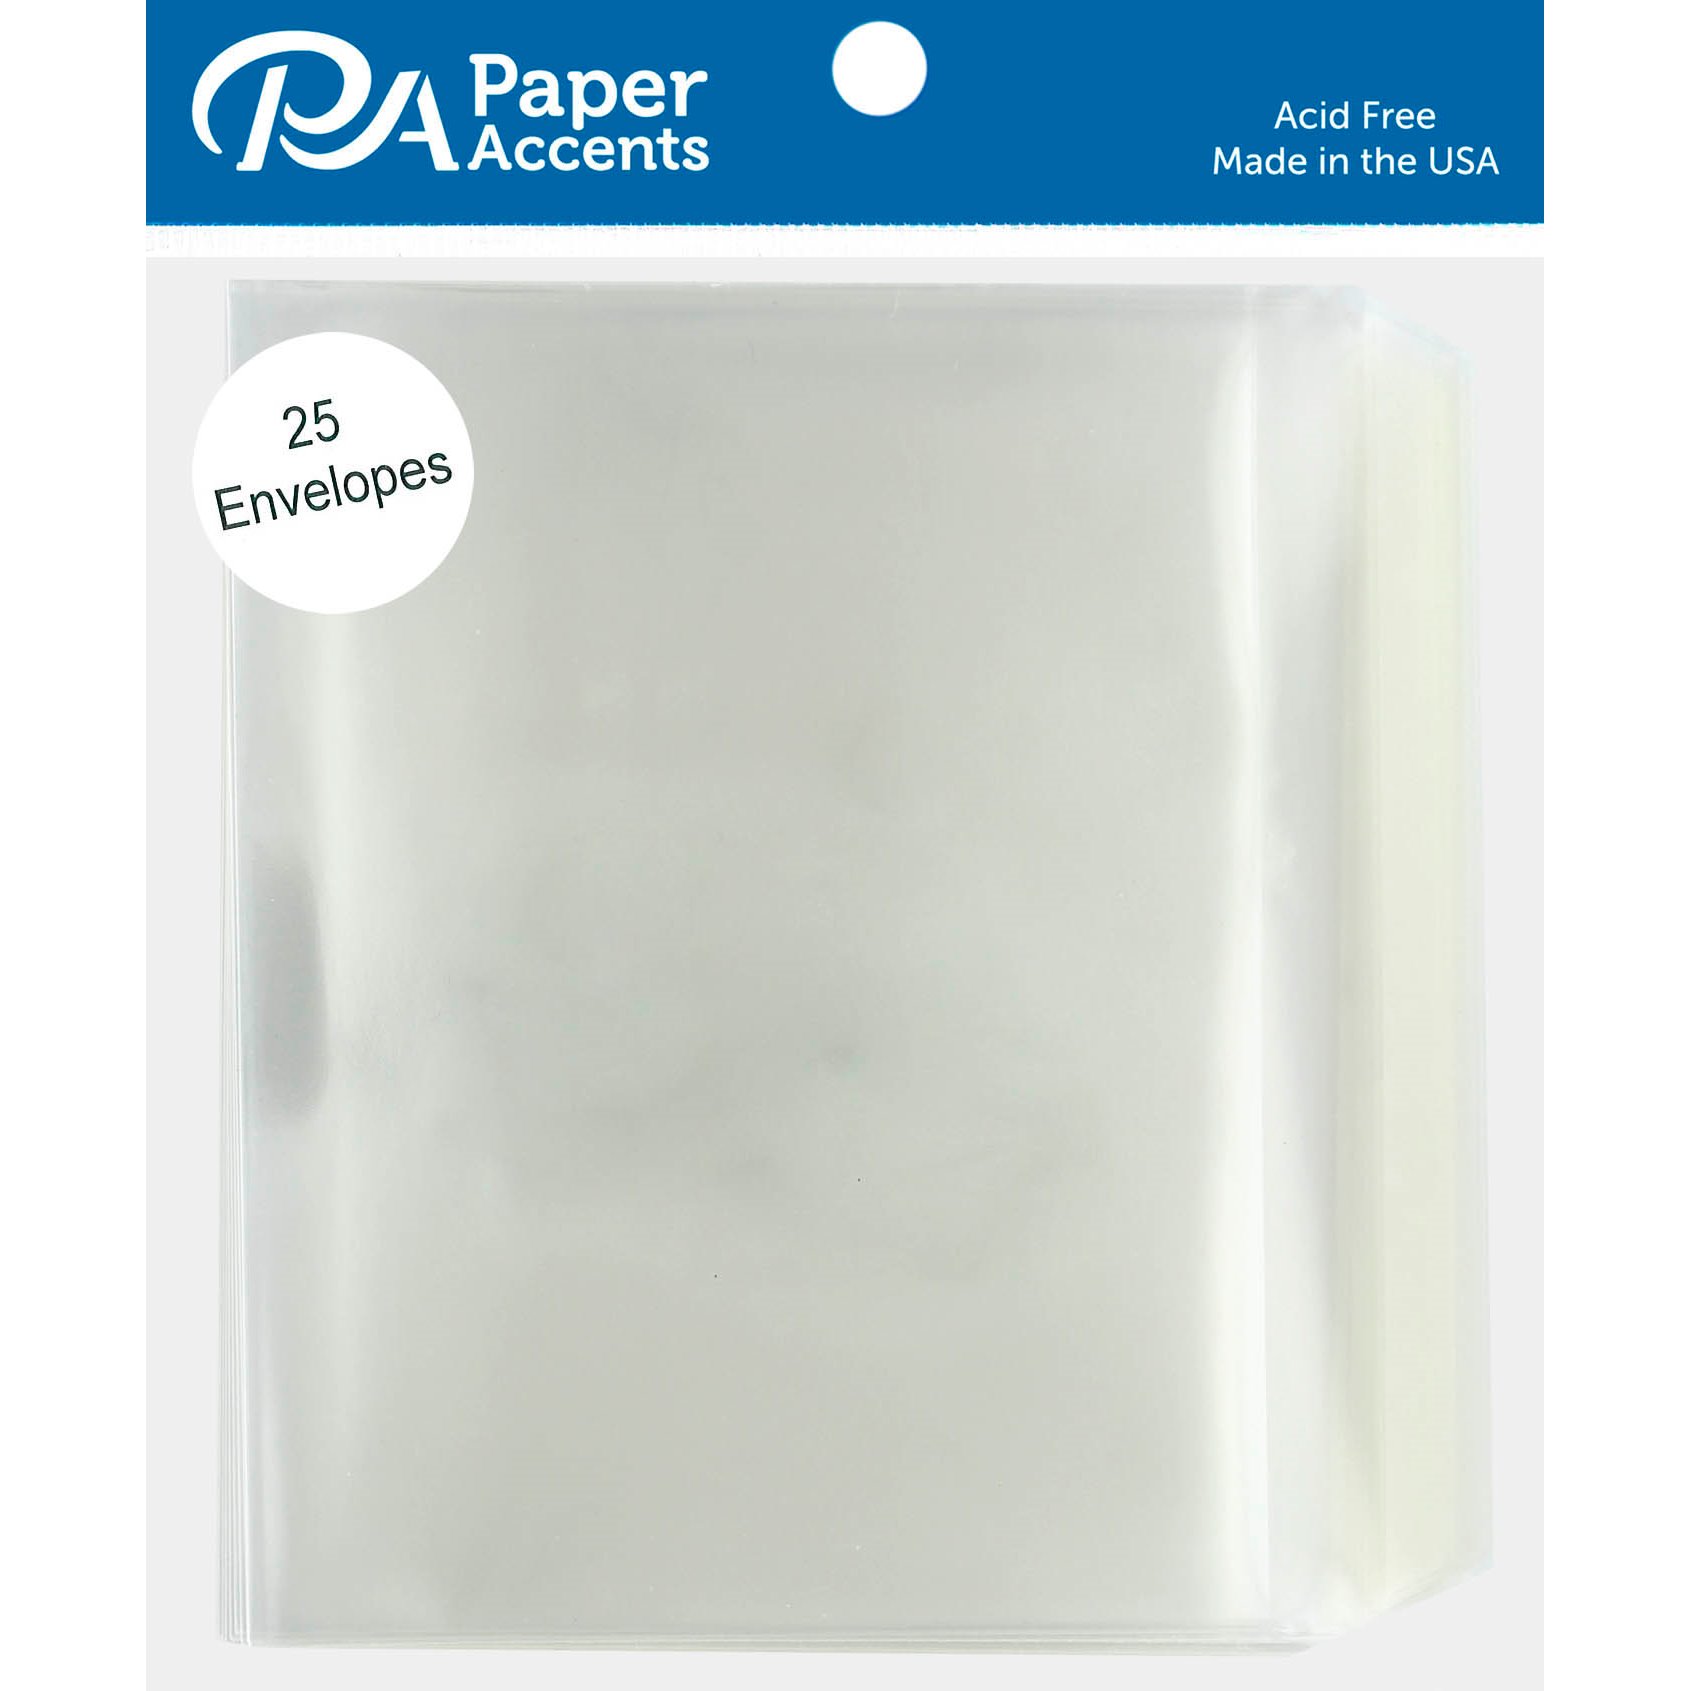 PA Paper™ Accents 4.38 x 5.75 Clear Envelopes, 25ct.